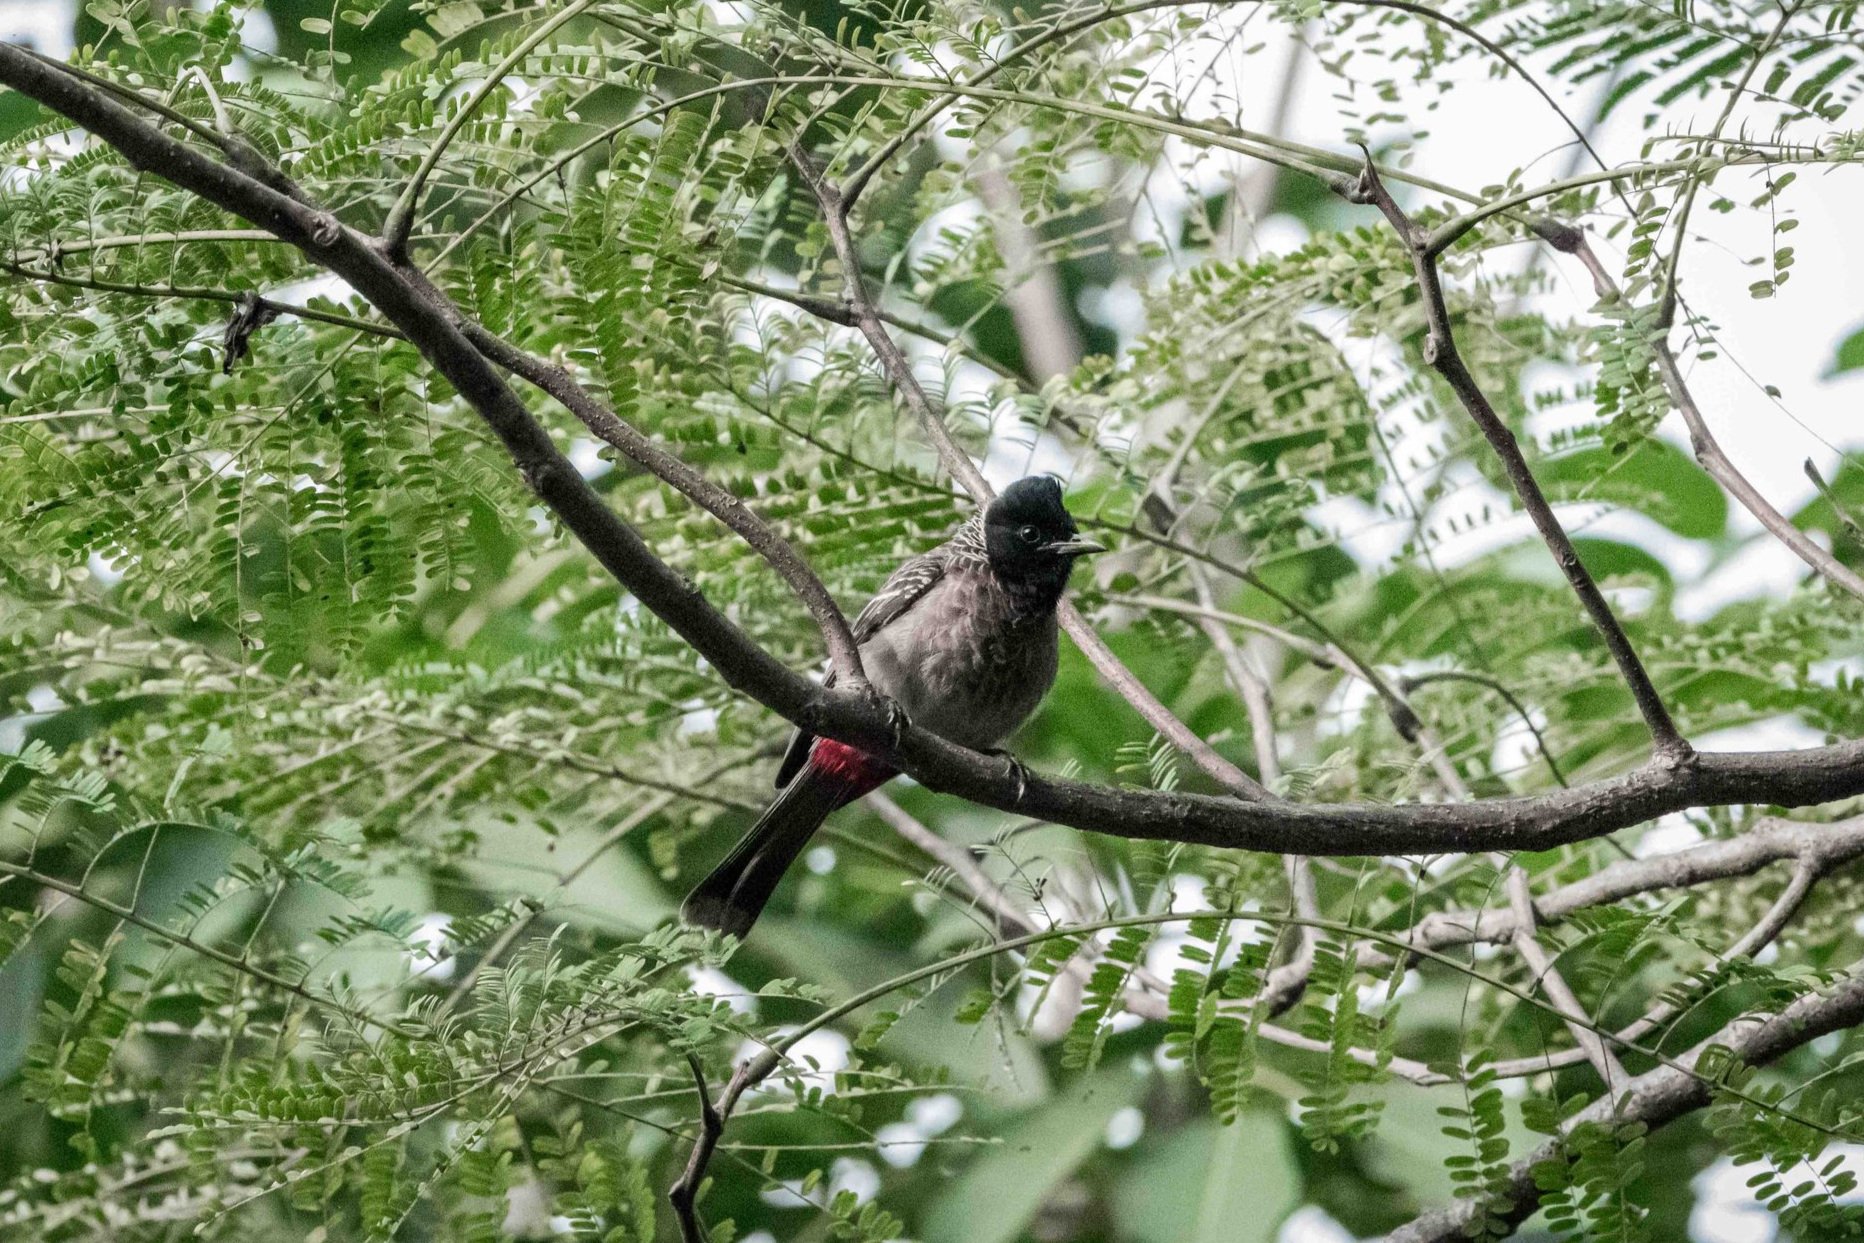 Red vented bulbul [Pycnonotus cafer]